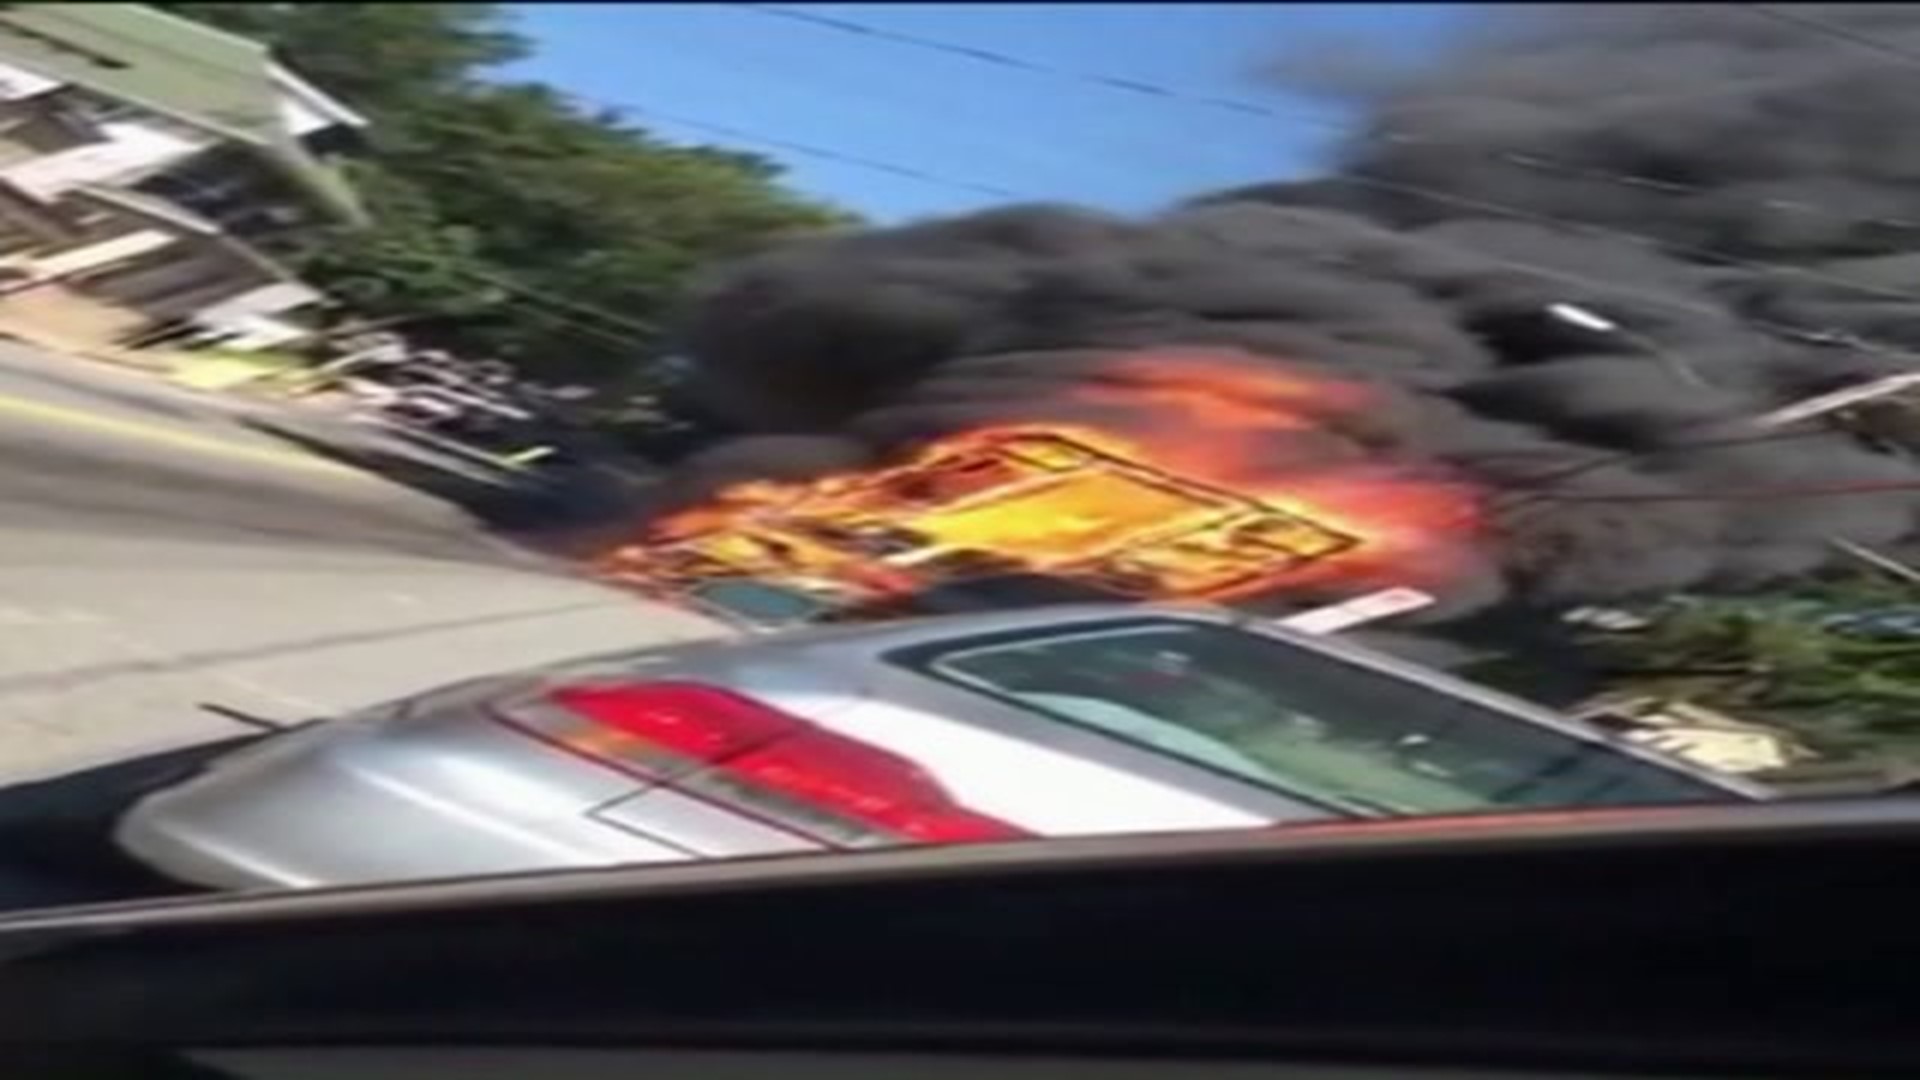 Man Pulls Woman to Safety in RV Fire